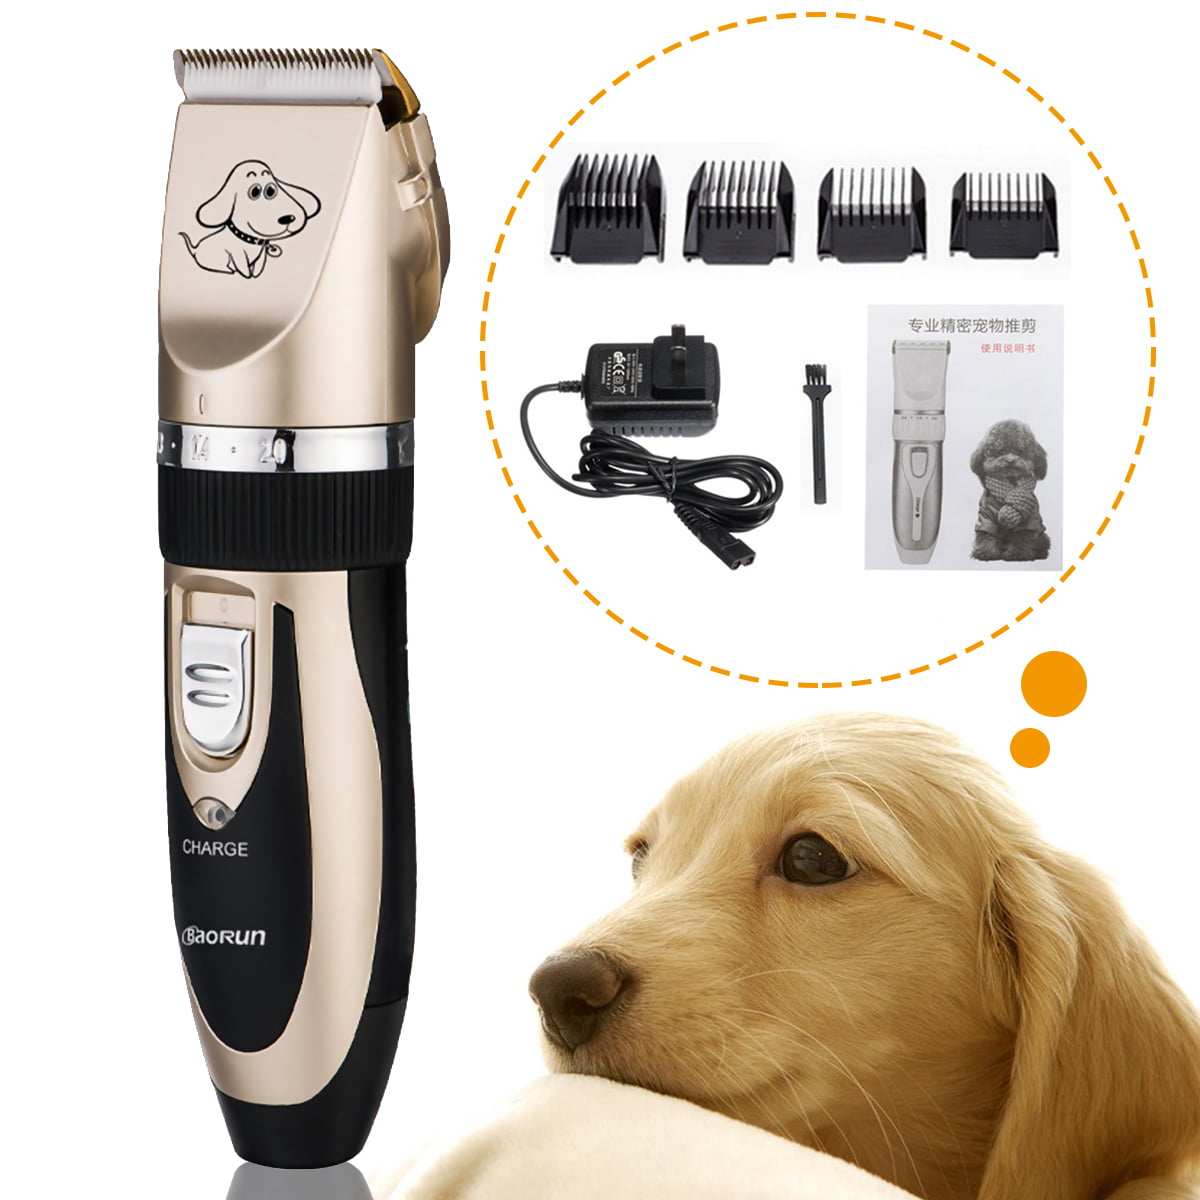 dog grooming clippers walmart